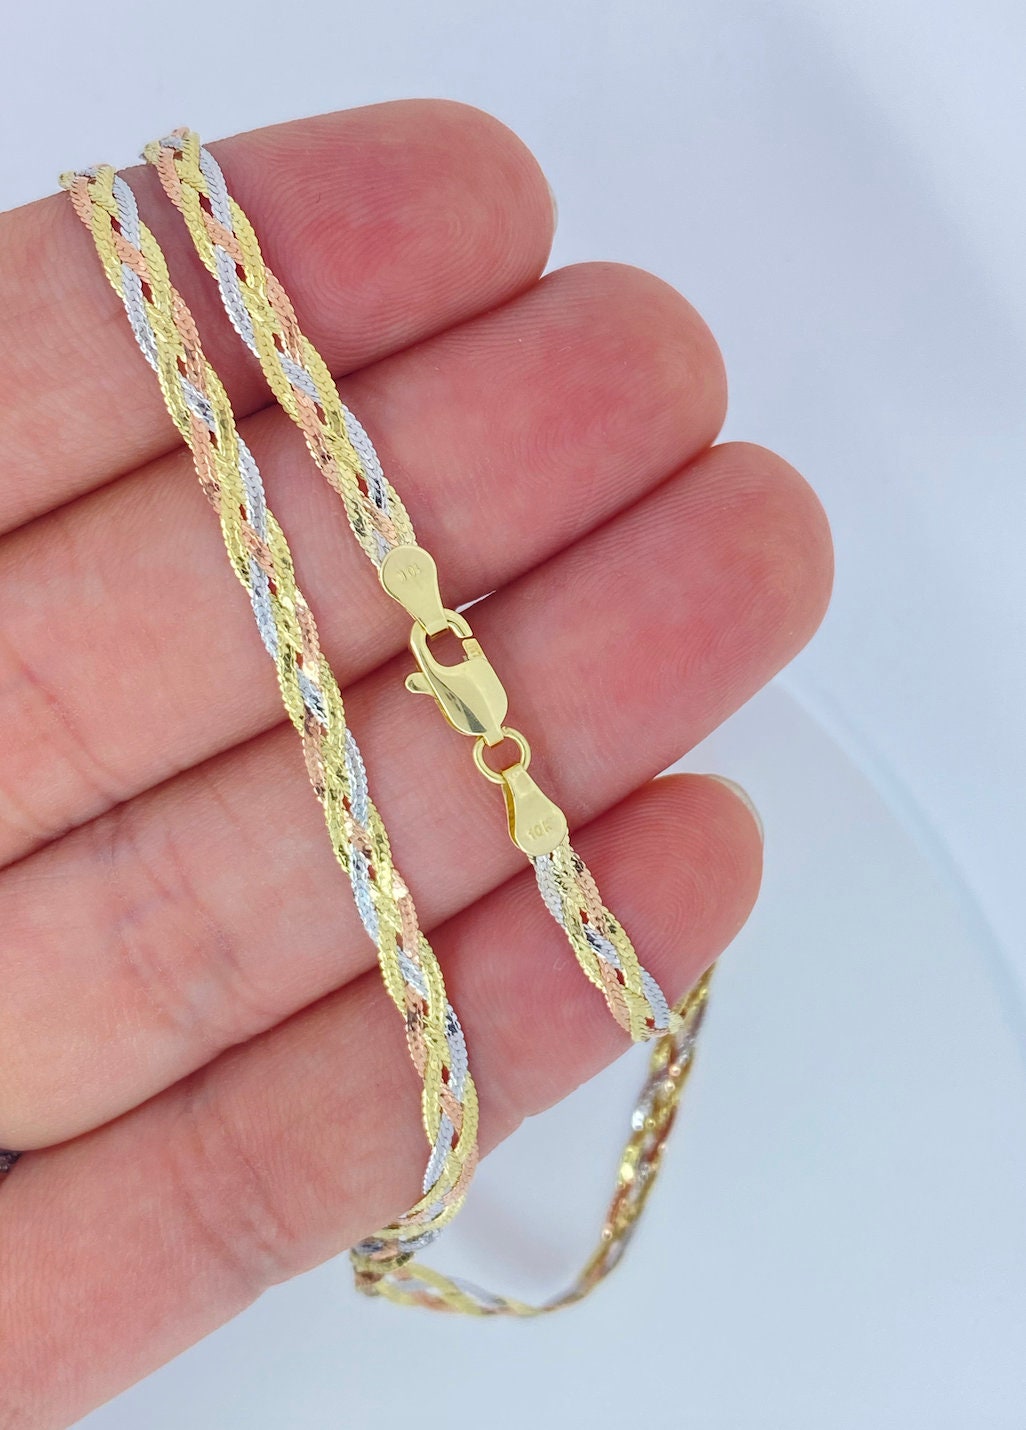 18K Gold Curb Chain 2.5mm Dainty Small Gold Necklace Slick Chain